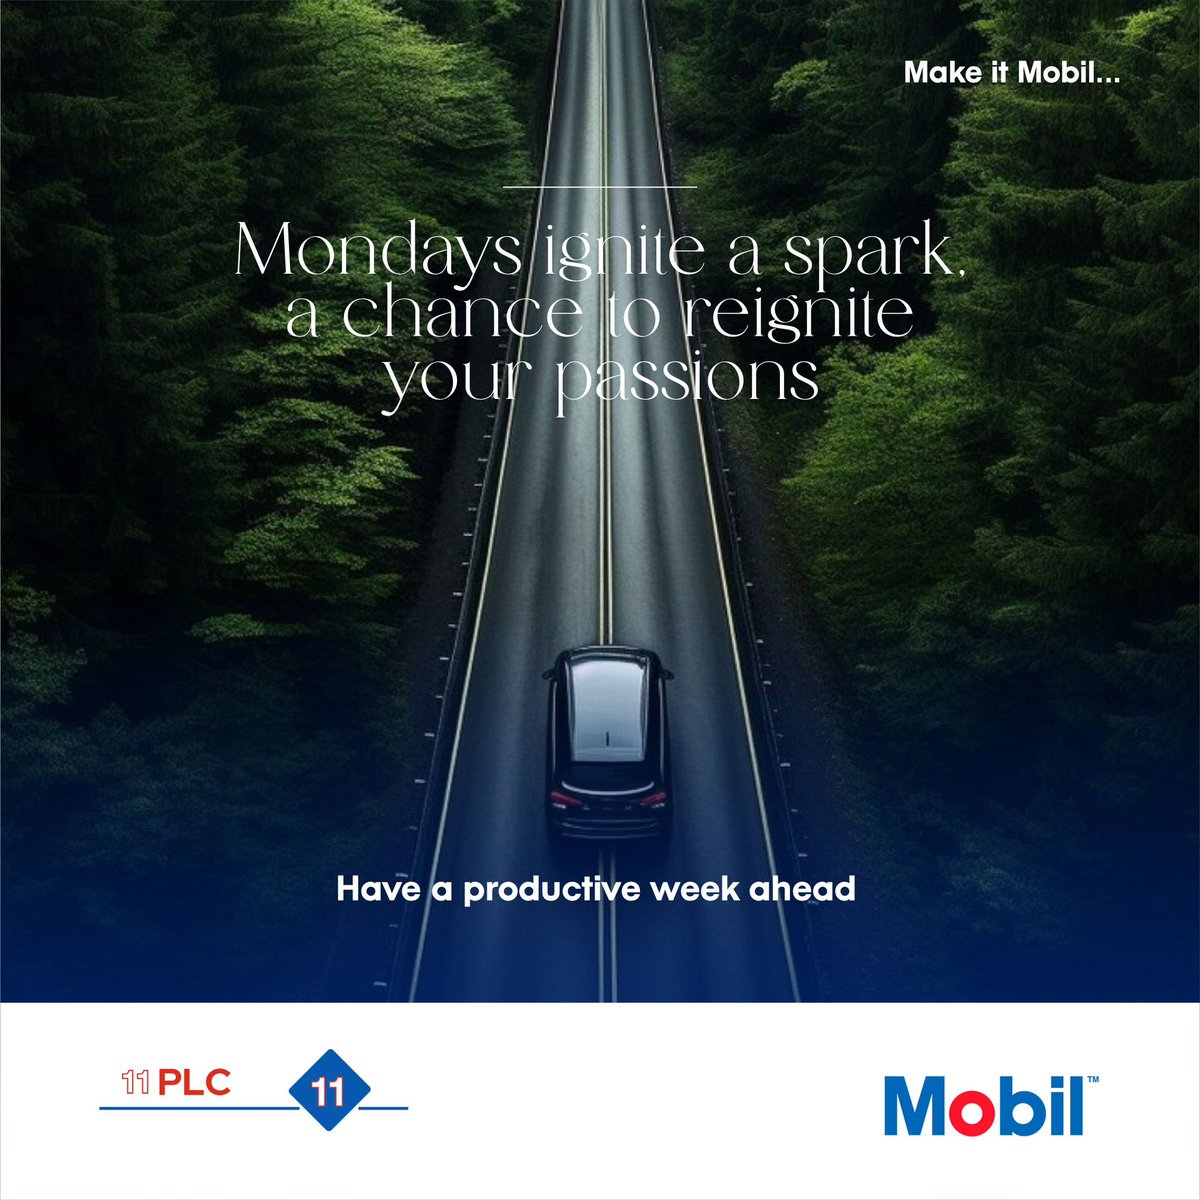 Monday Motivation! Mondays ignite a spark, a chance to reignite your passions and fuel your dreams! Embrace the fresh start and make this week count! #MondayMotivation

 #NewBeginnings #FollowYourPassion #mobillubricants #mobilinnigeria